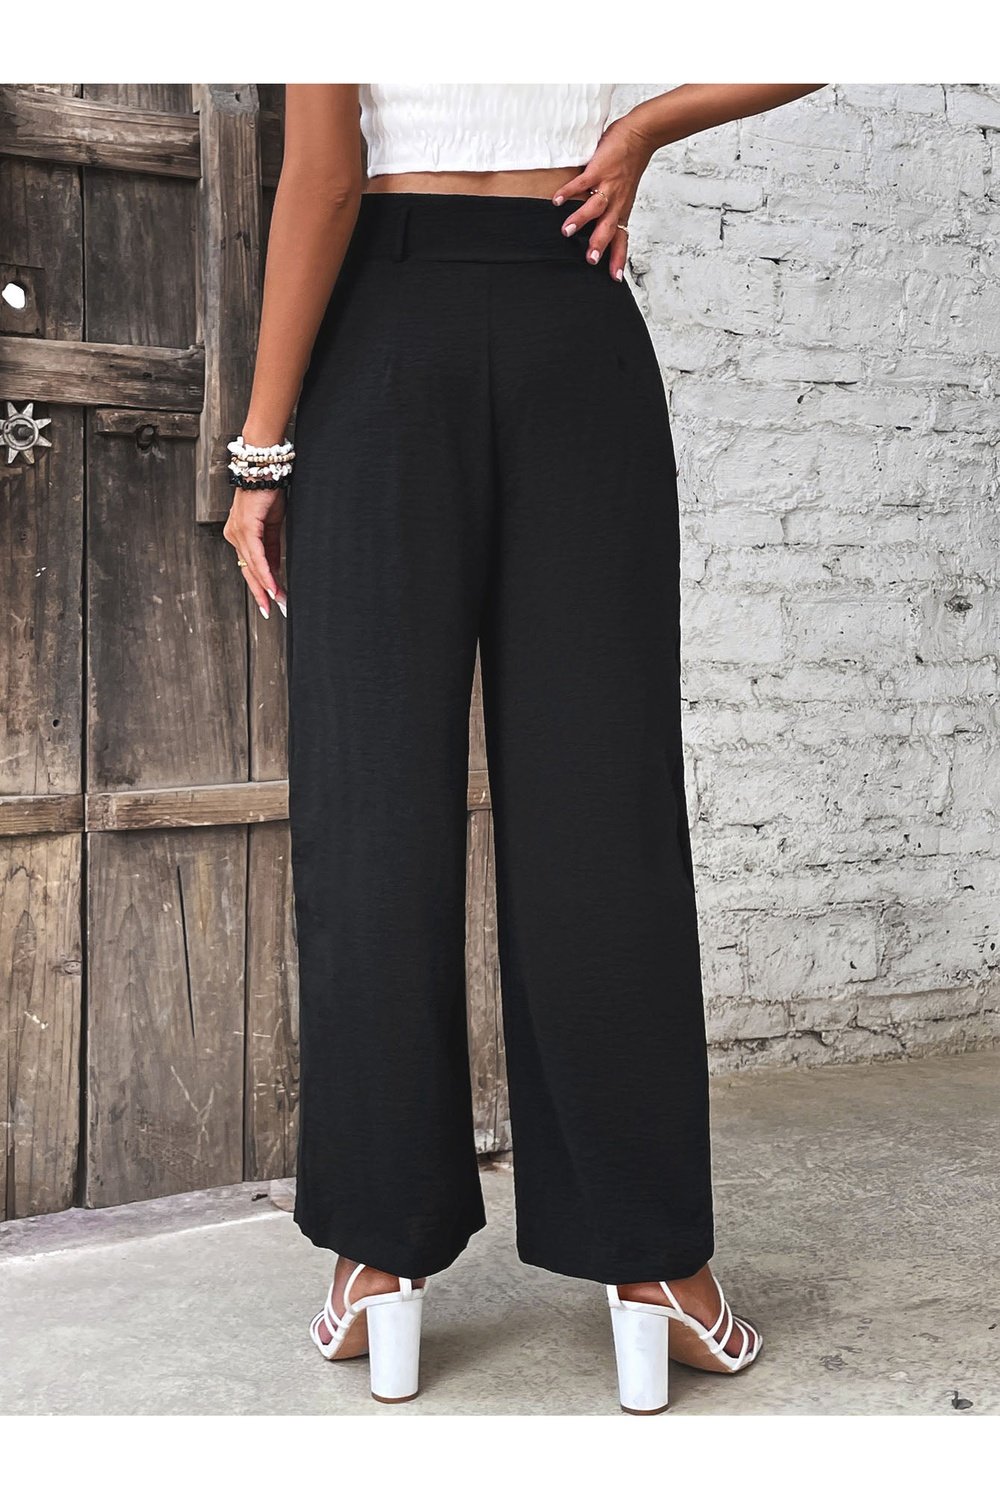 Ruched High Waist Straight Leg Pants - Pants - FITGGINS